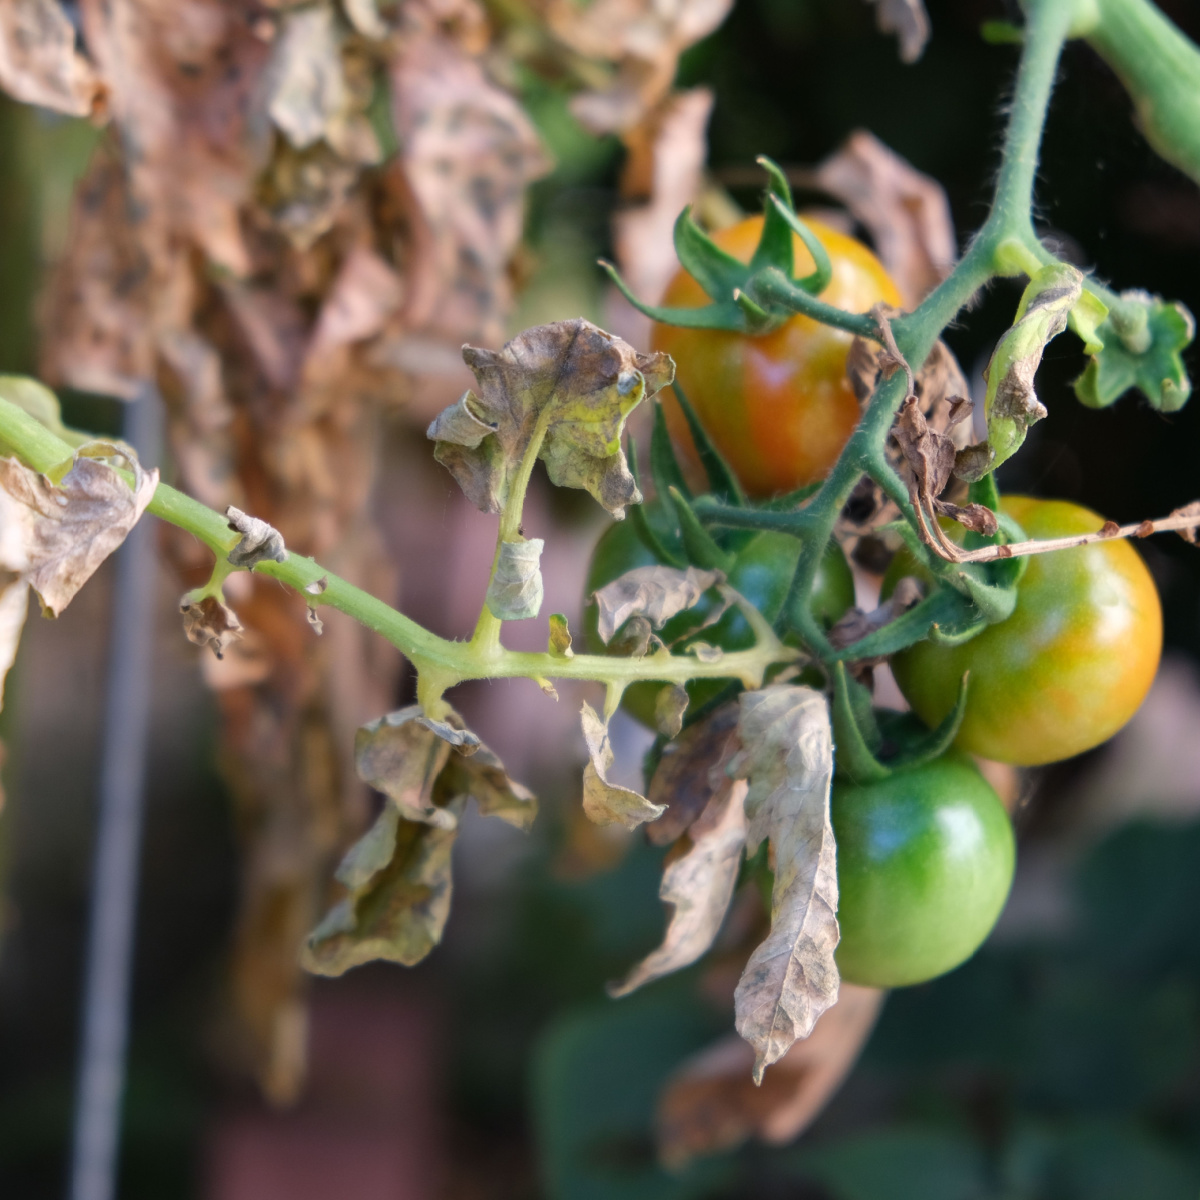 How To Dispose Of Tomato Plants - What To Do When Plants Die!